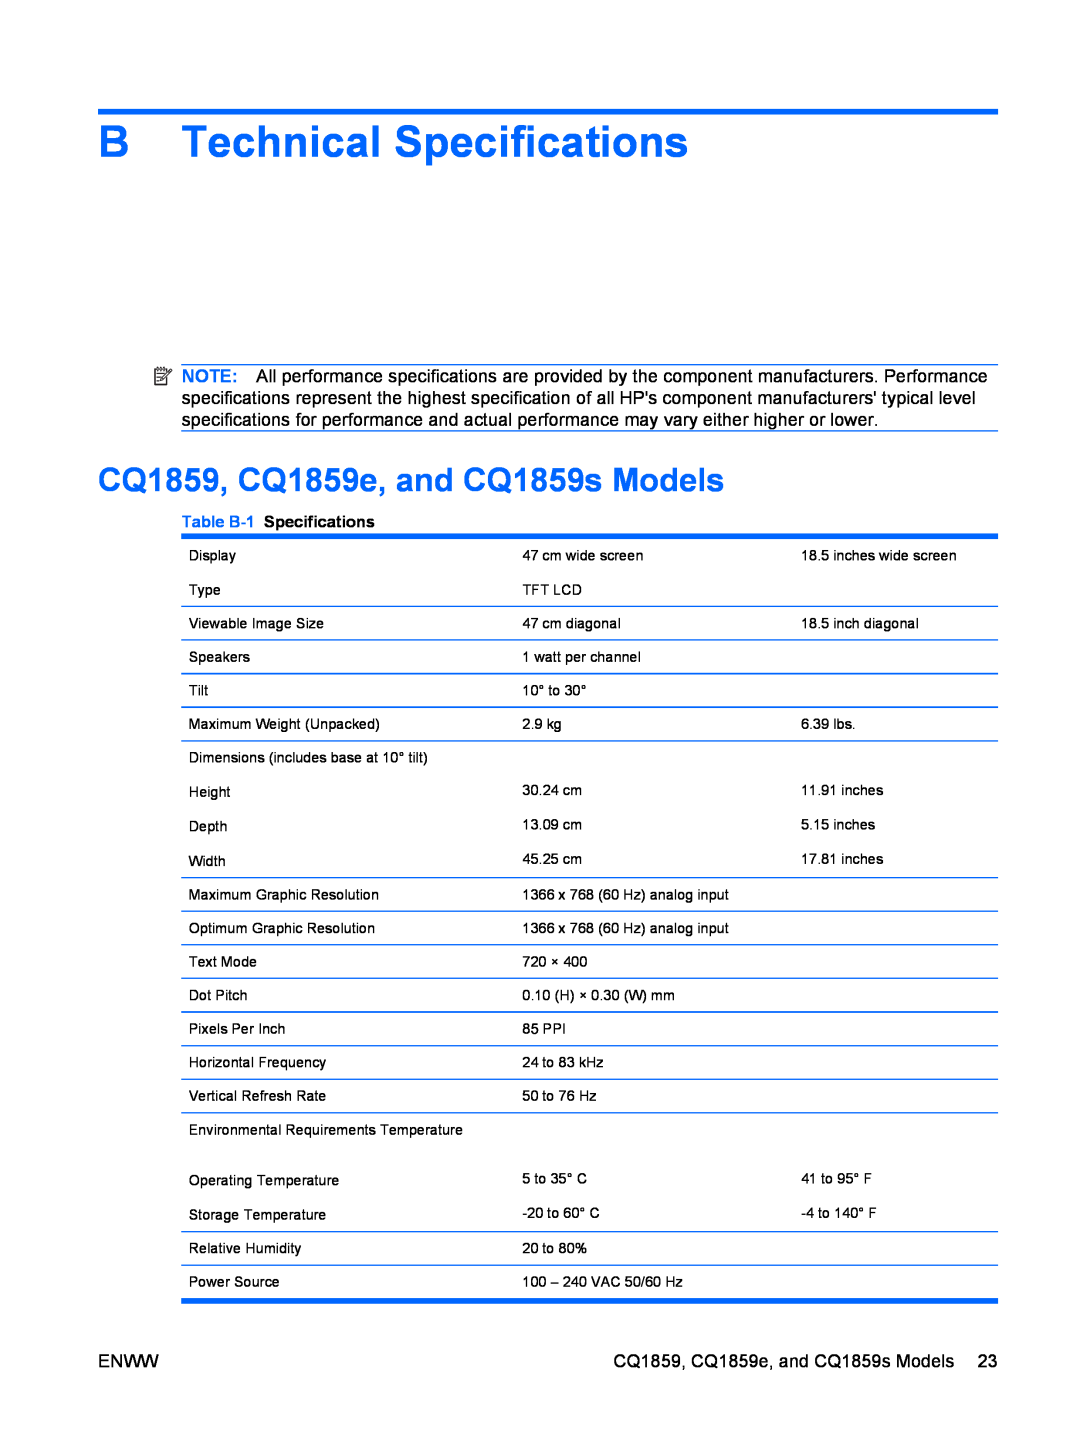 HP CQ1859E manual B Technical Specifications, CQ1859, CQ1859e, and CQ1859s Models, Table B-1 Specifications 